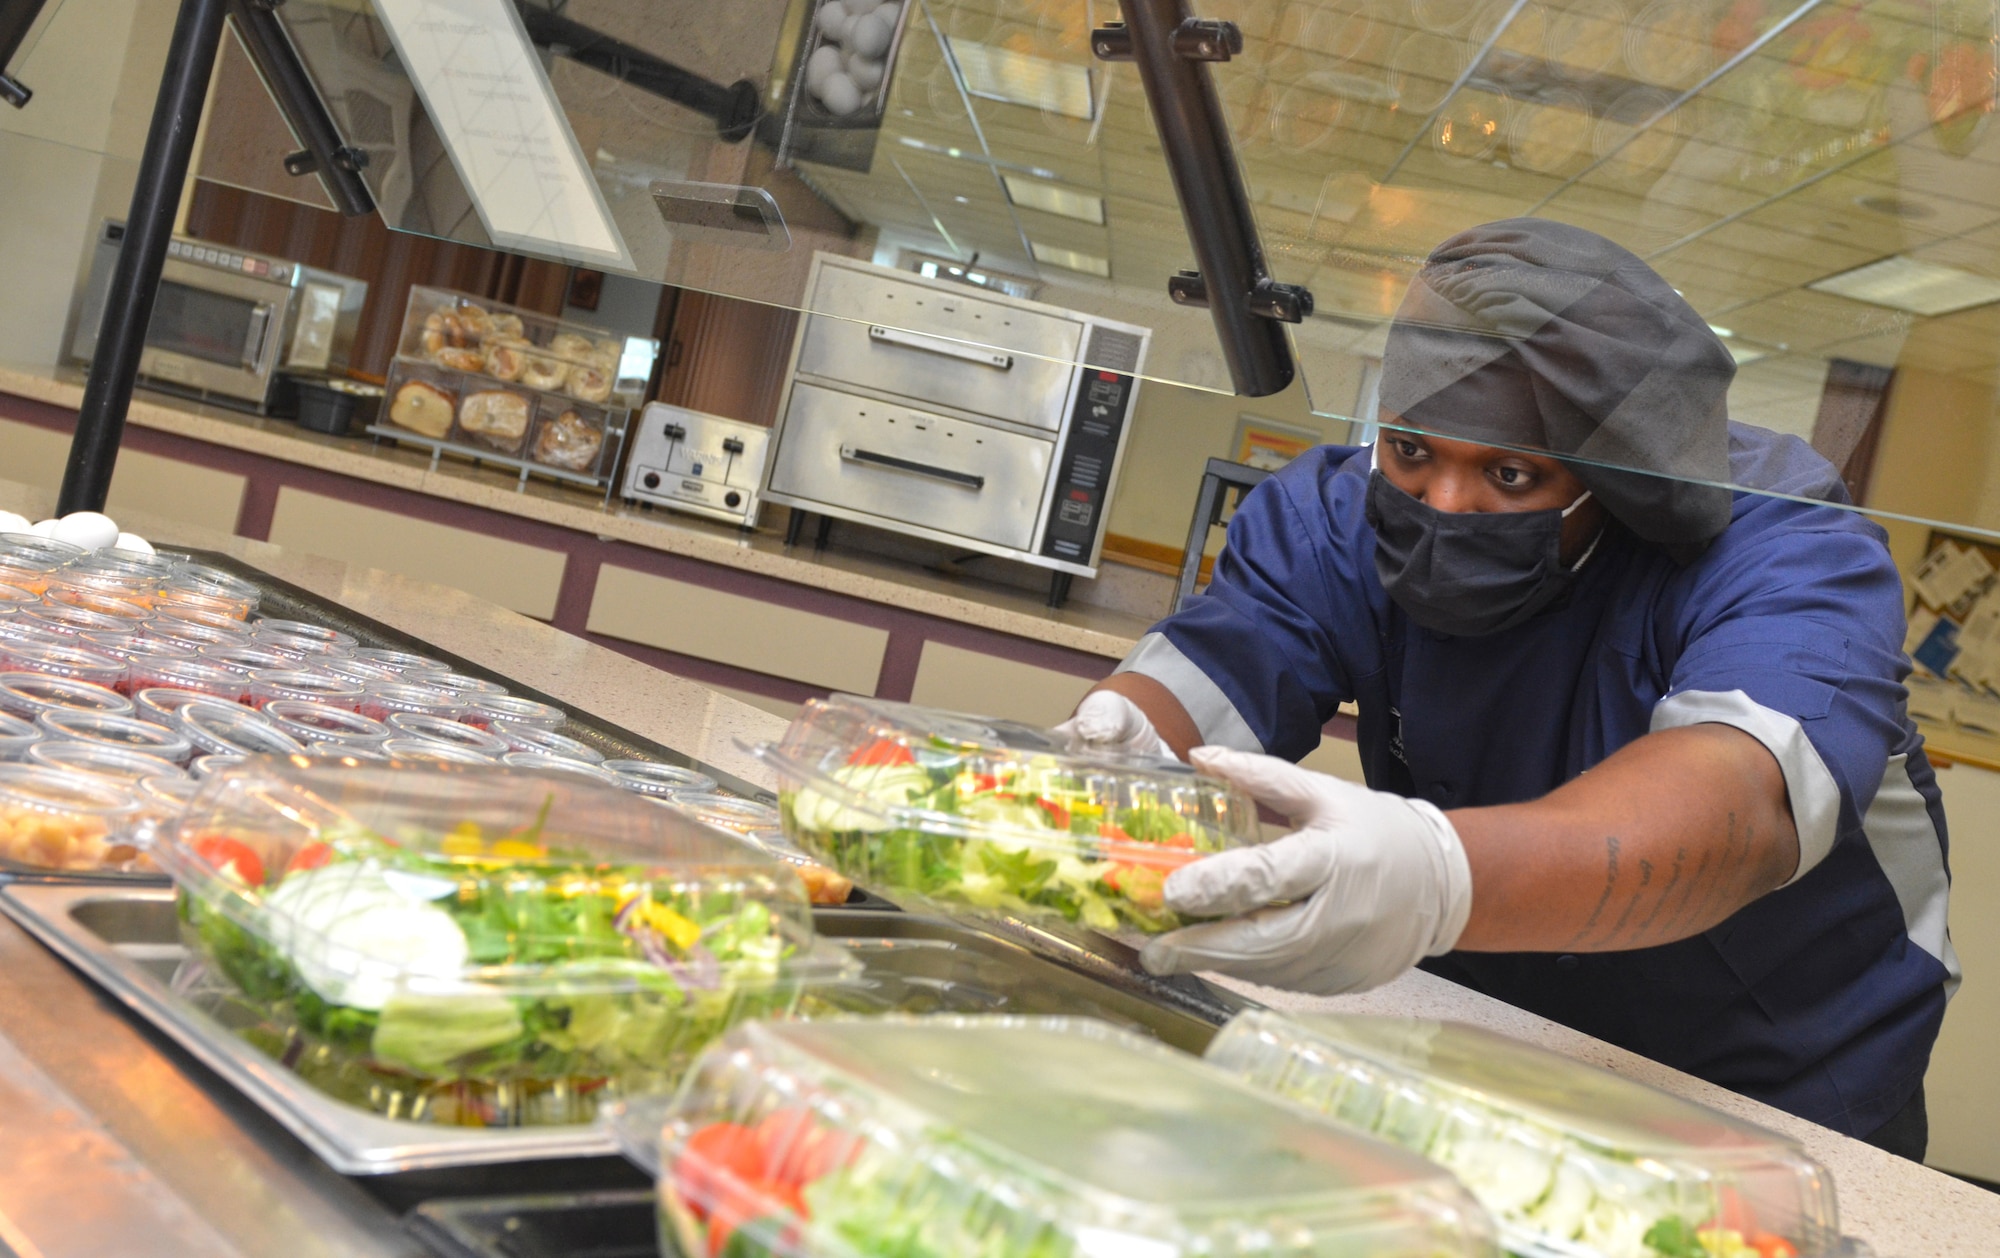 Image of Navy Culinary Specialist 3rd Class Keith Johnson prepping food.